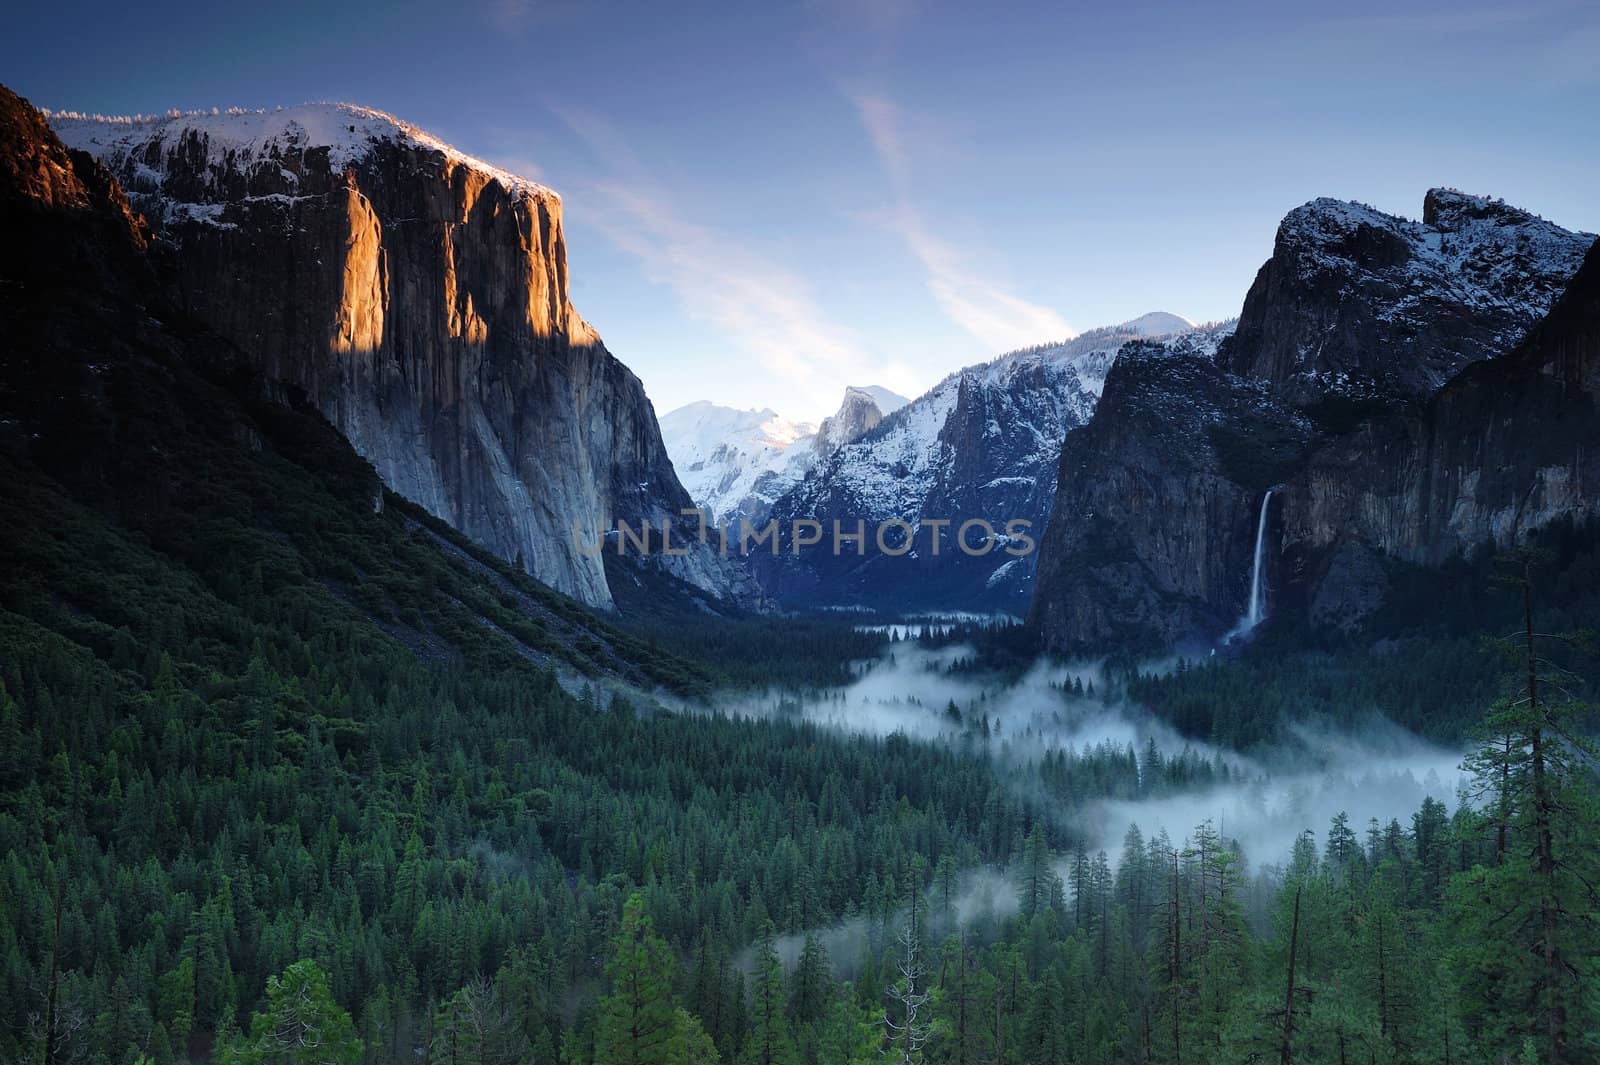 A sunrise over El Capitan from the famous Tunnel View, Yosemite National Park